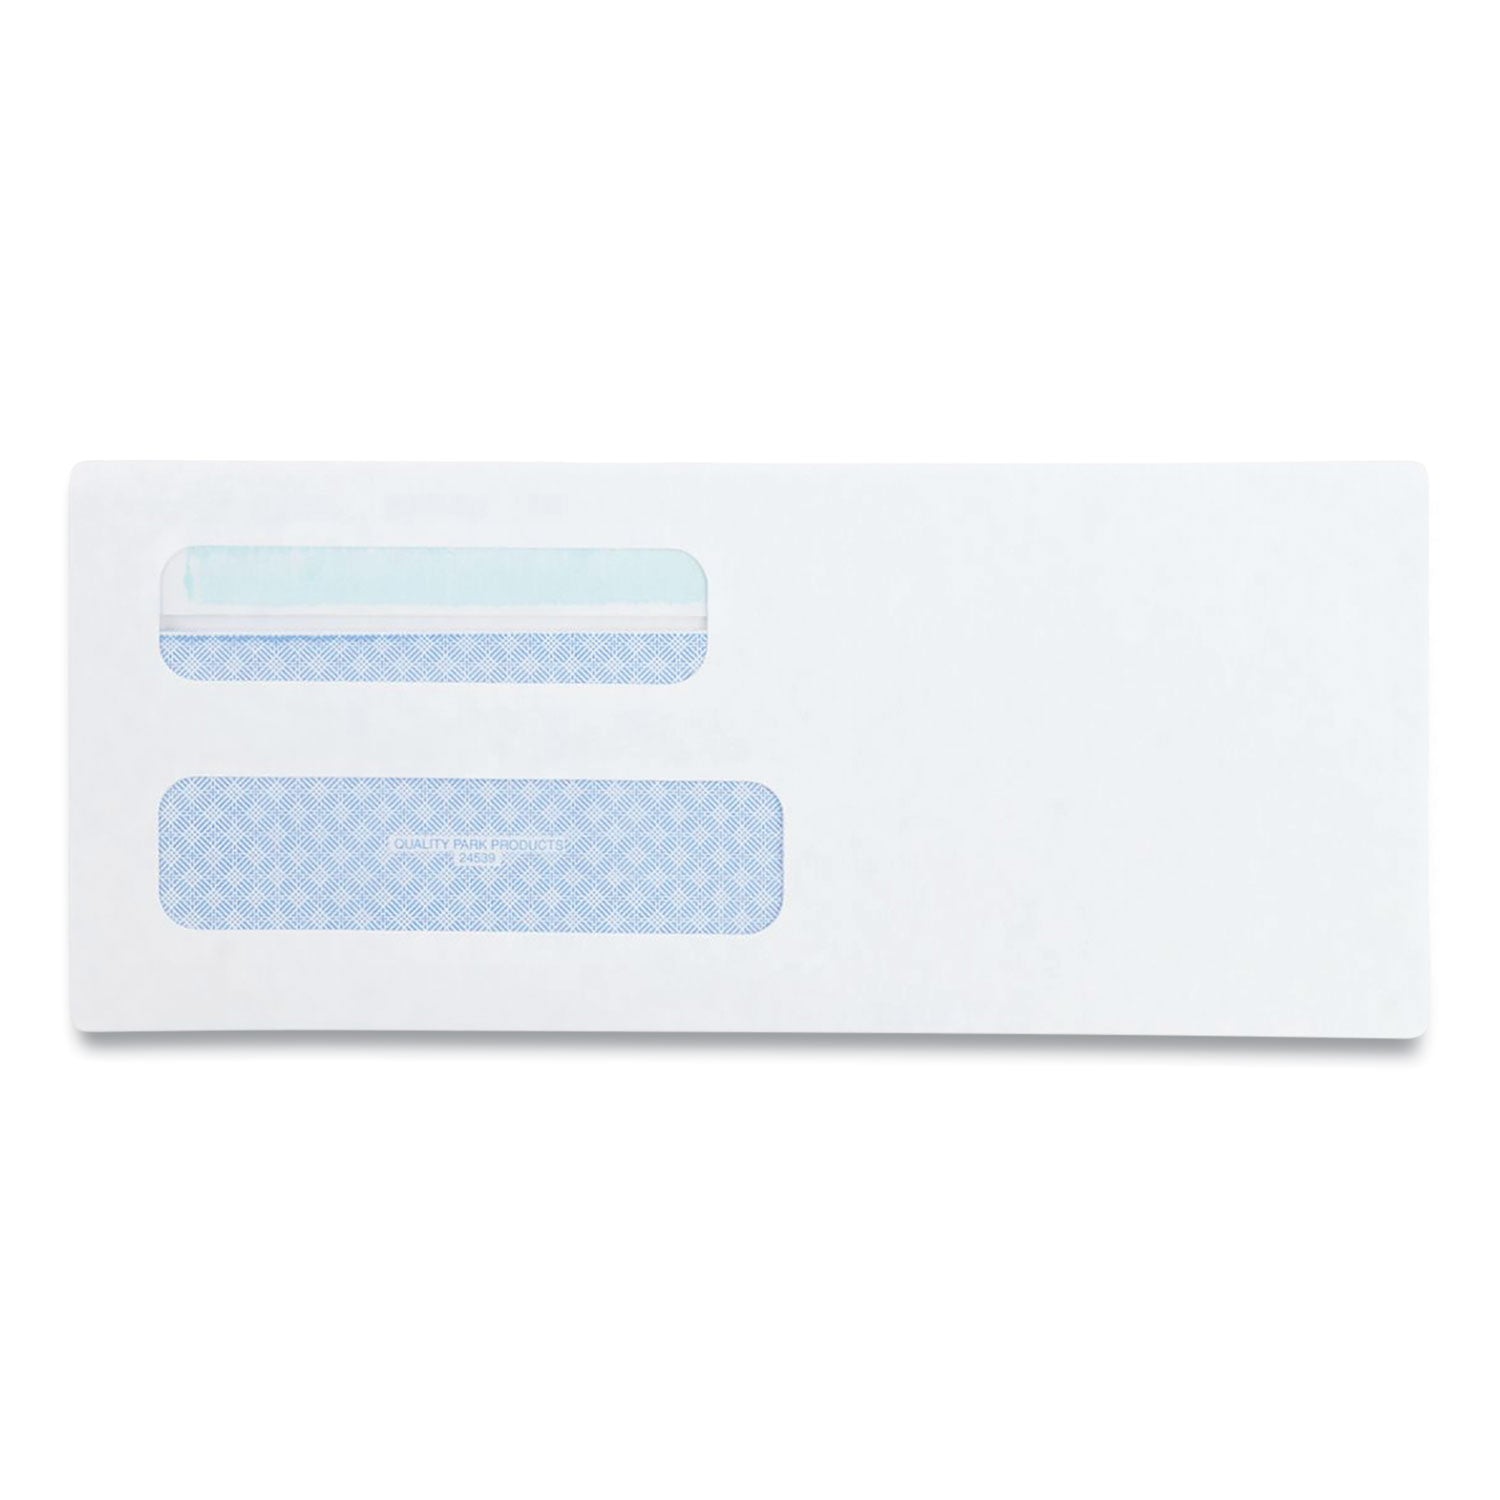 Double Window Redi-Seal Security-Tinted Envelope, #8 5/8, Commercial Flap, Redi-Seal Closure, 3.63 x 8.63, White, 500/Box - 